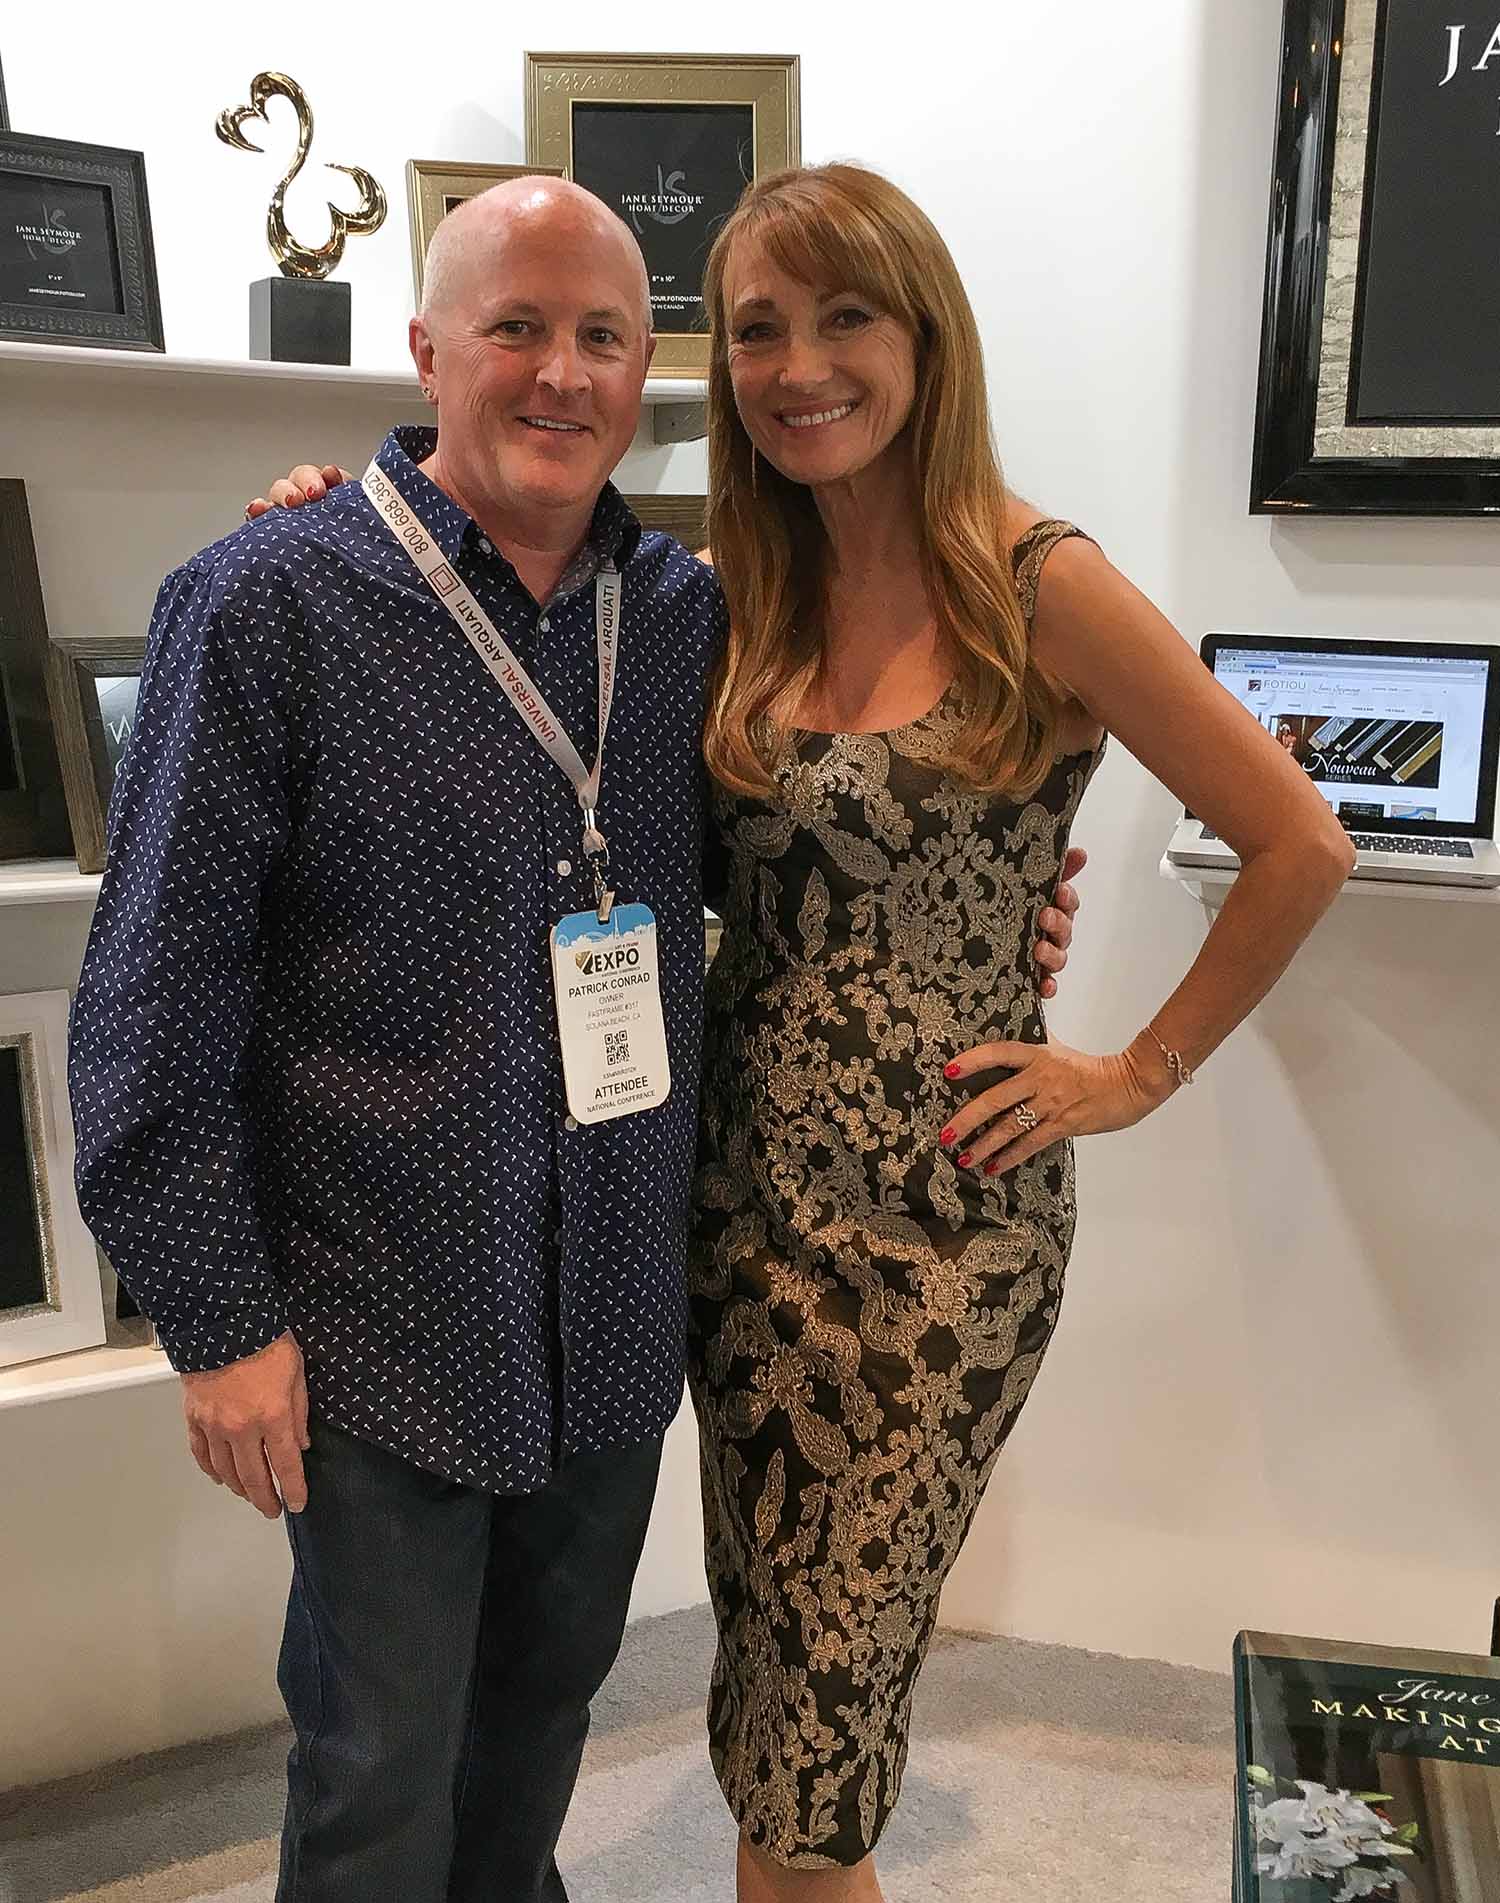 Patrick with Jane Seymour at the West Coast Art and Frame Show.